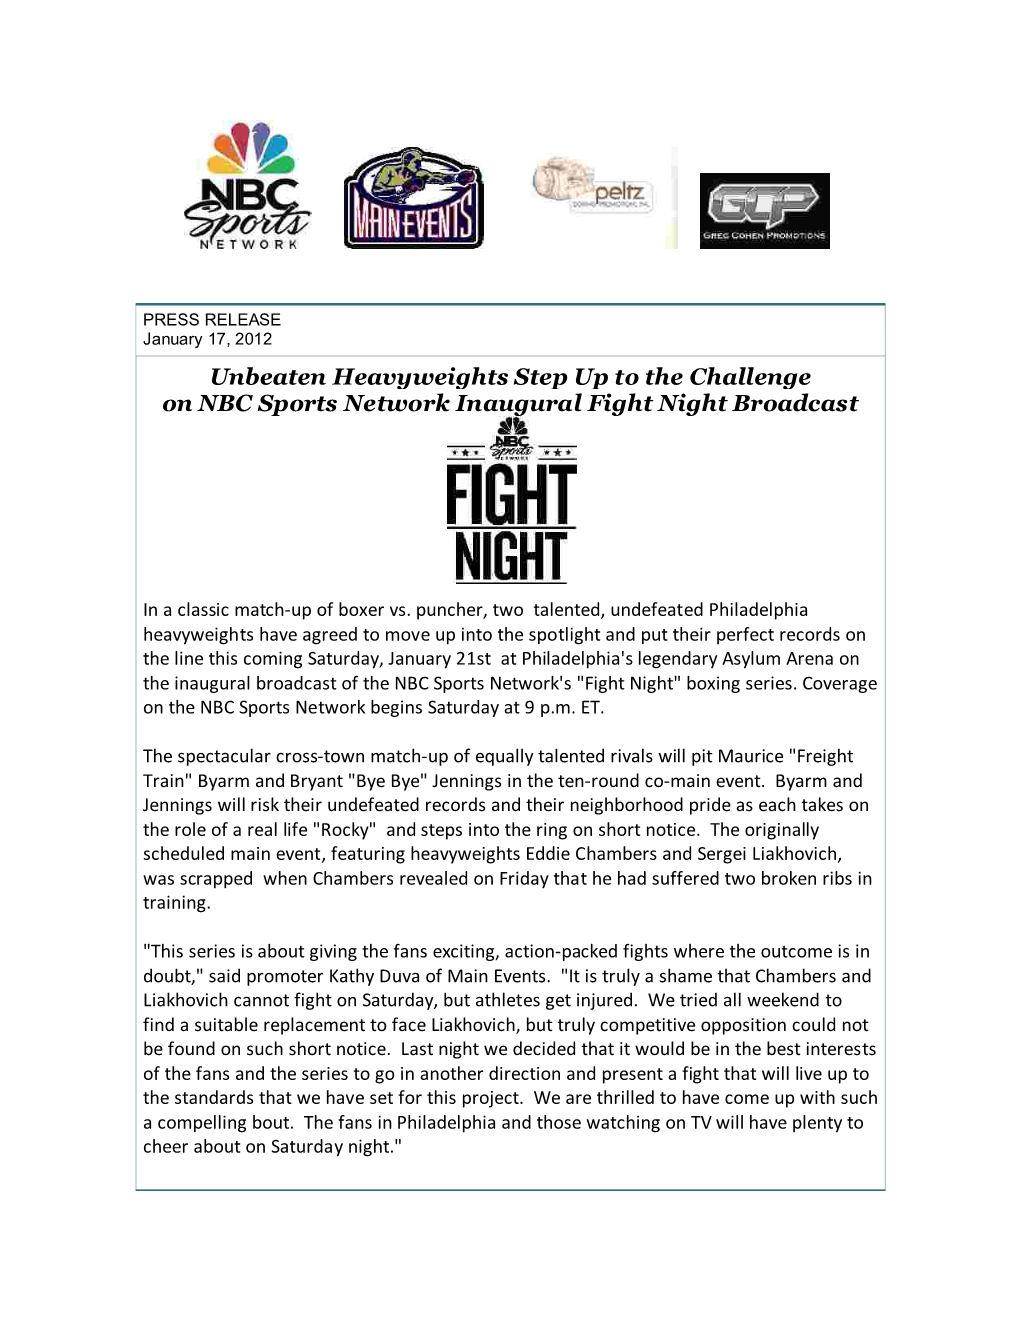 Unbeaten Heavyweights Step up to the Challenge on NBC Sports Network Inaugural Fight Night Broadcast